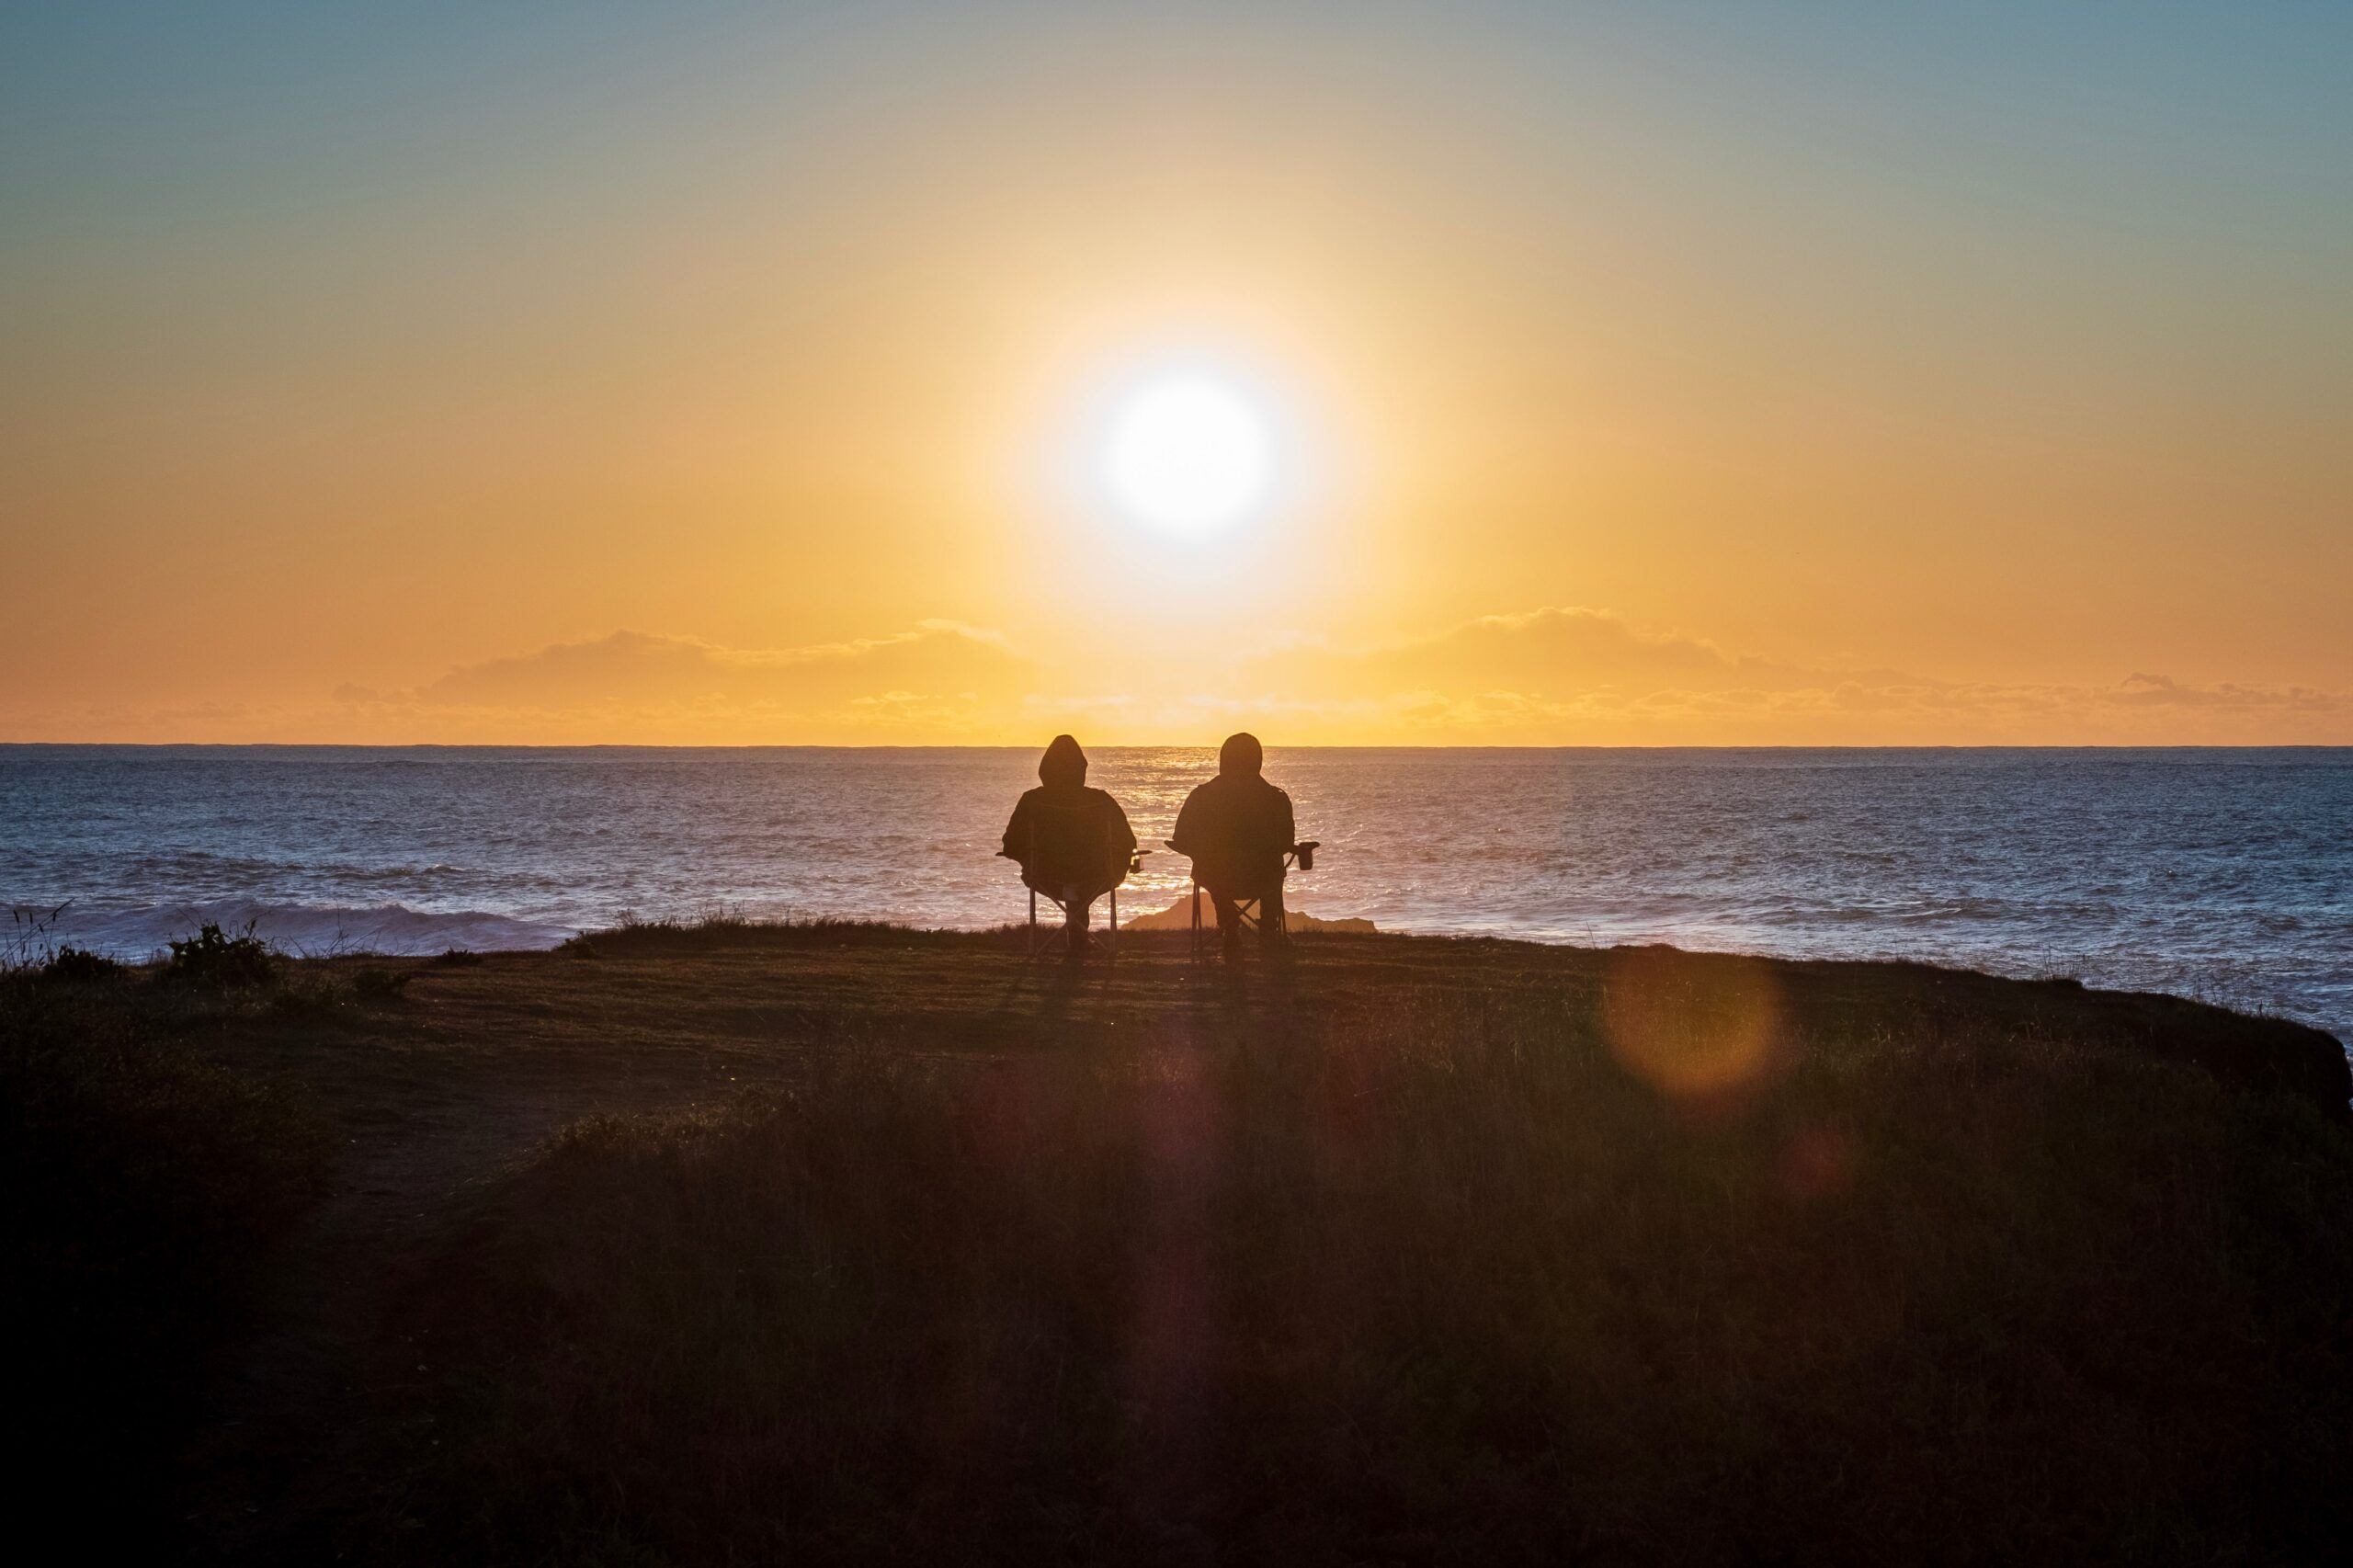 Two people standing on a hill overlooking the ocean at sunset.